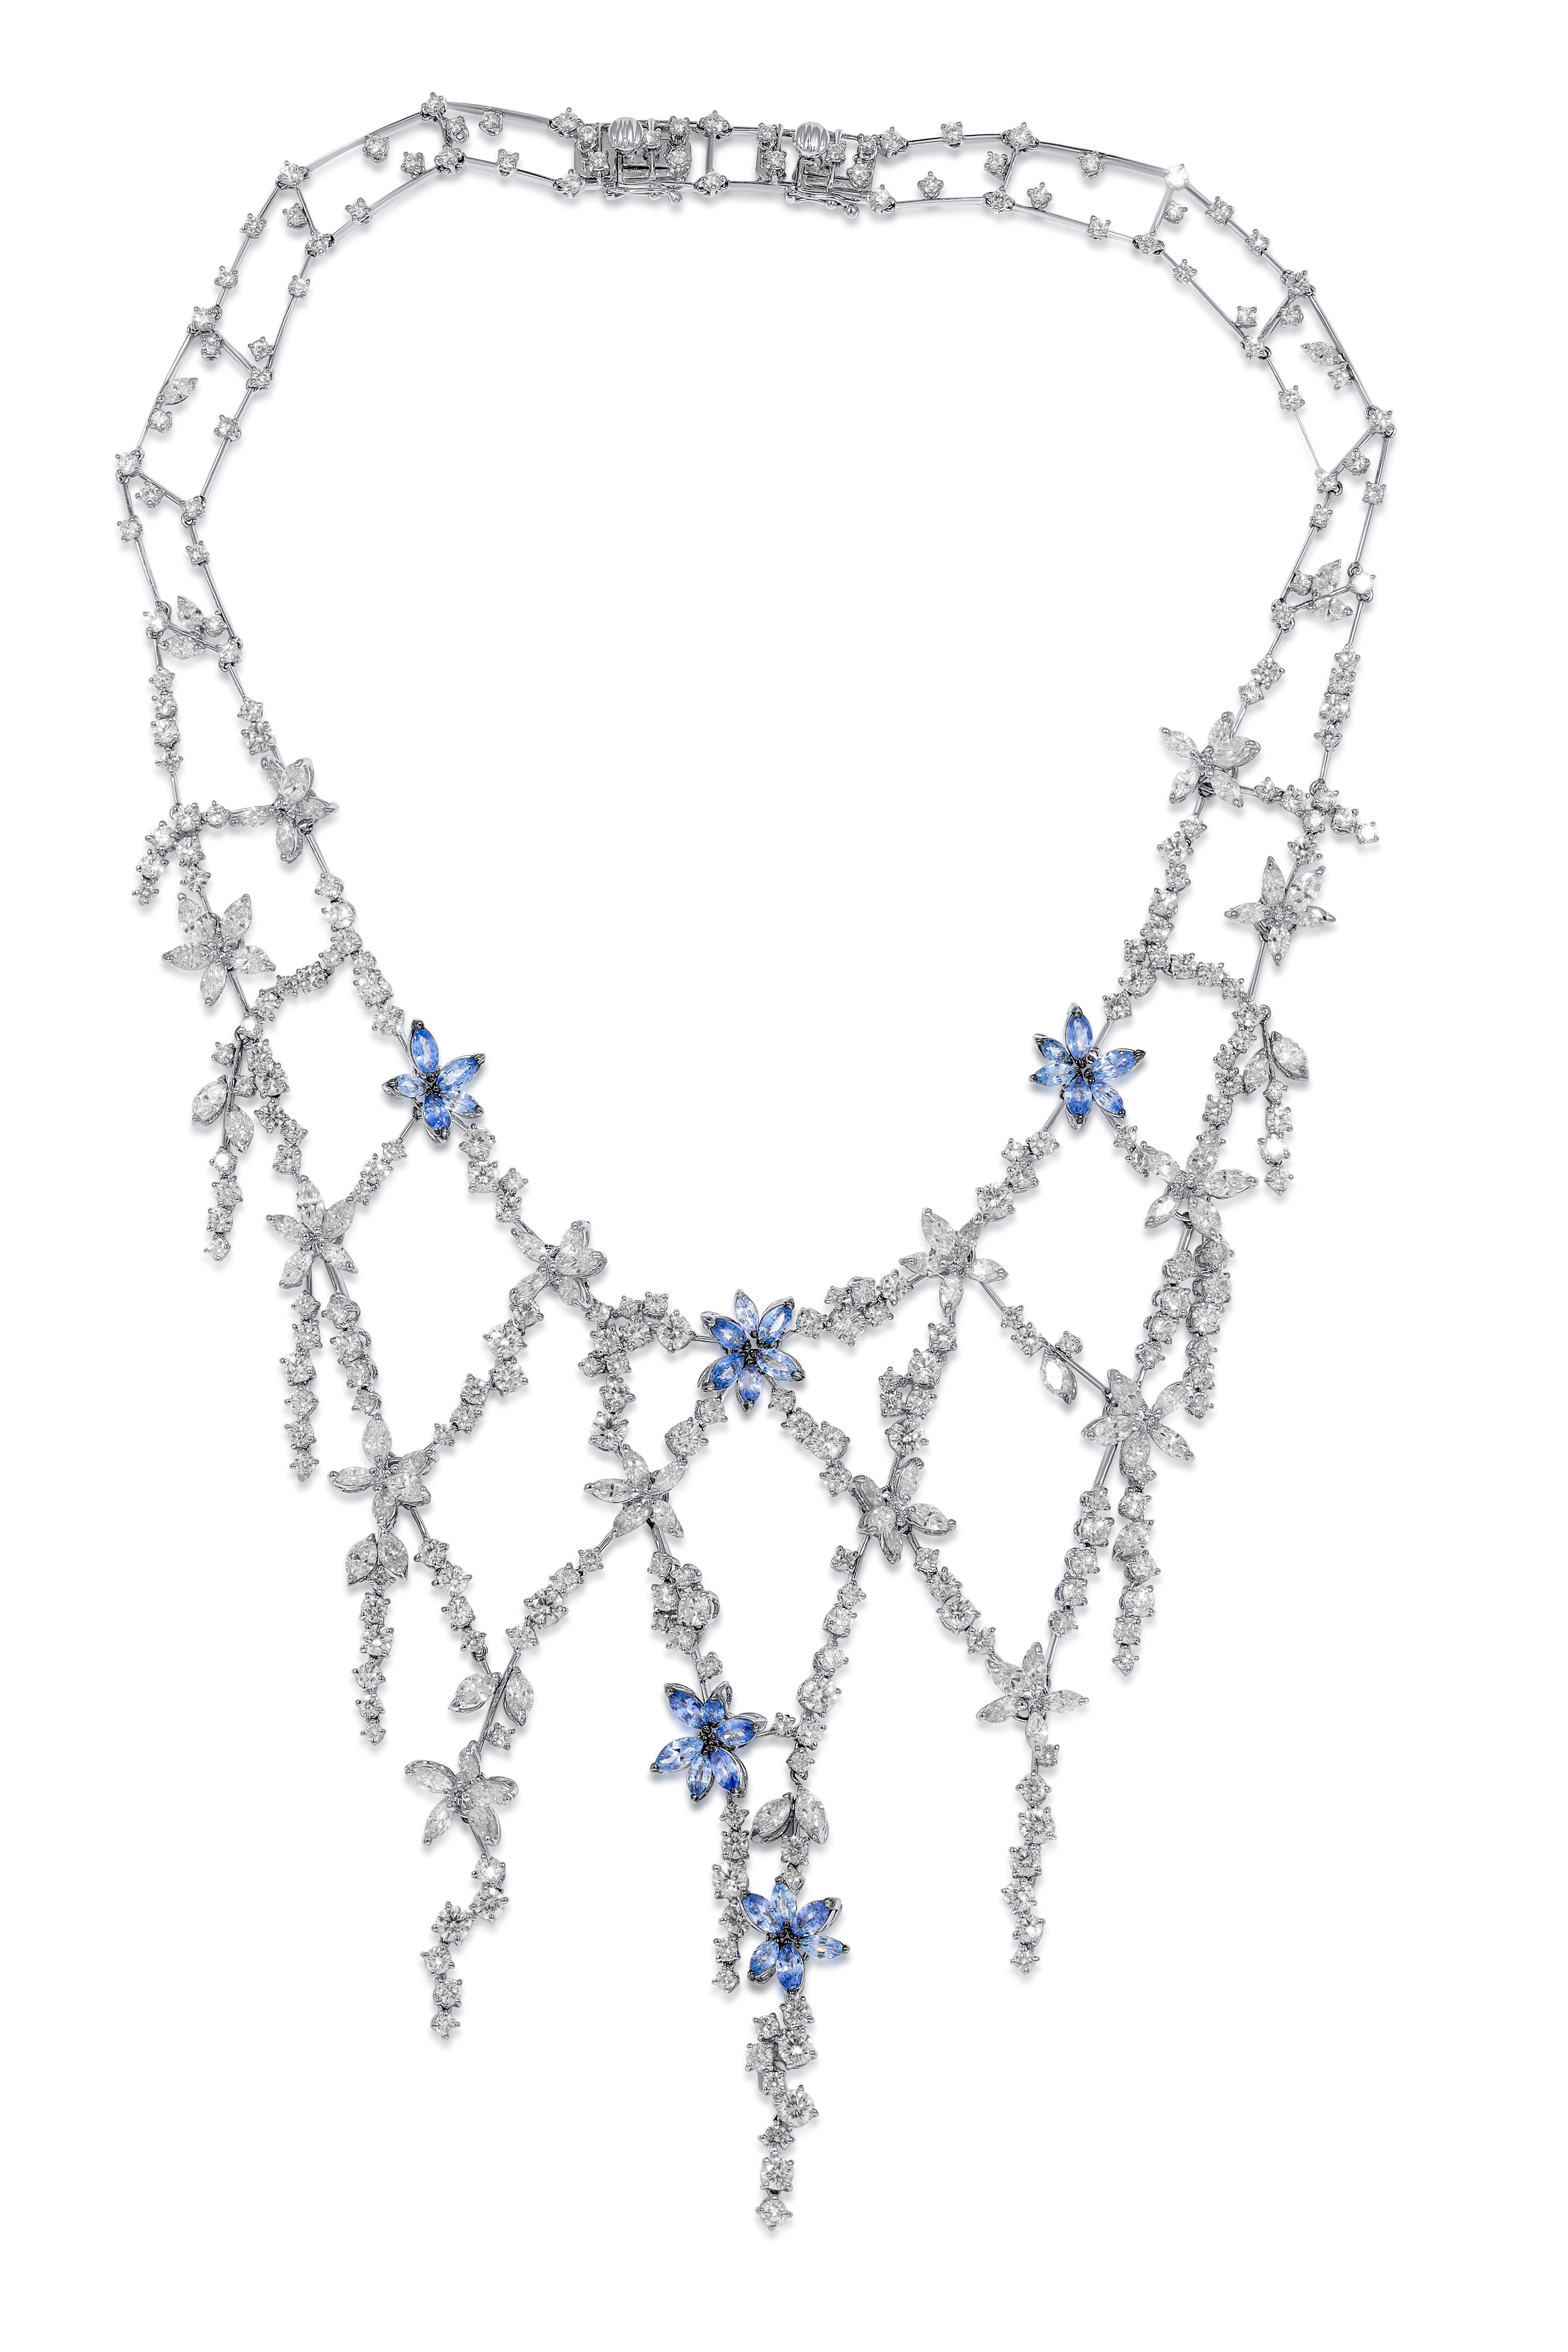 Marquise Cut Diana M. Sapphire and Diamond Hanging Flowers Necklace For Sale